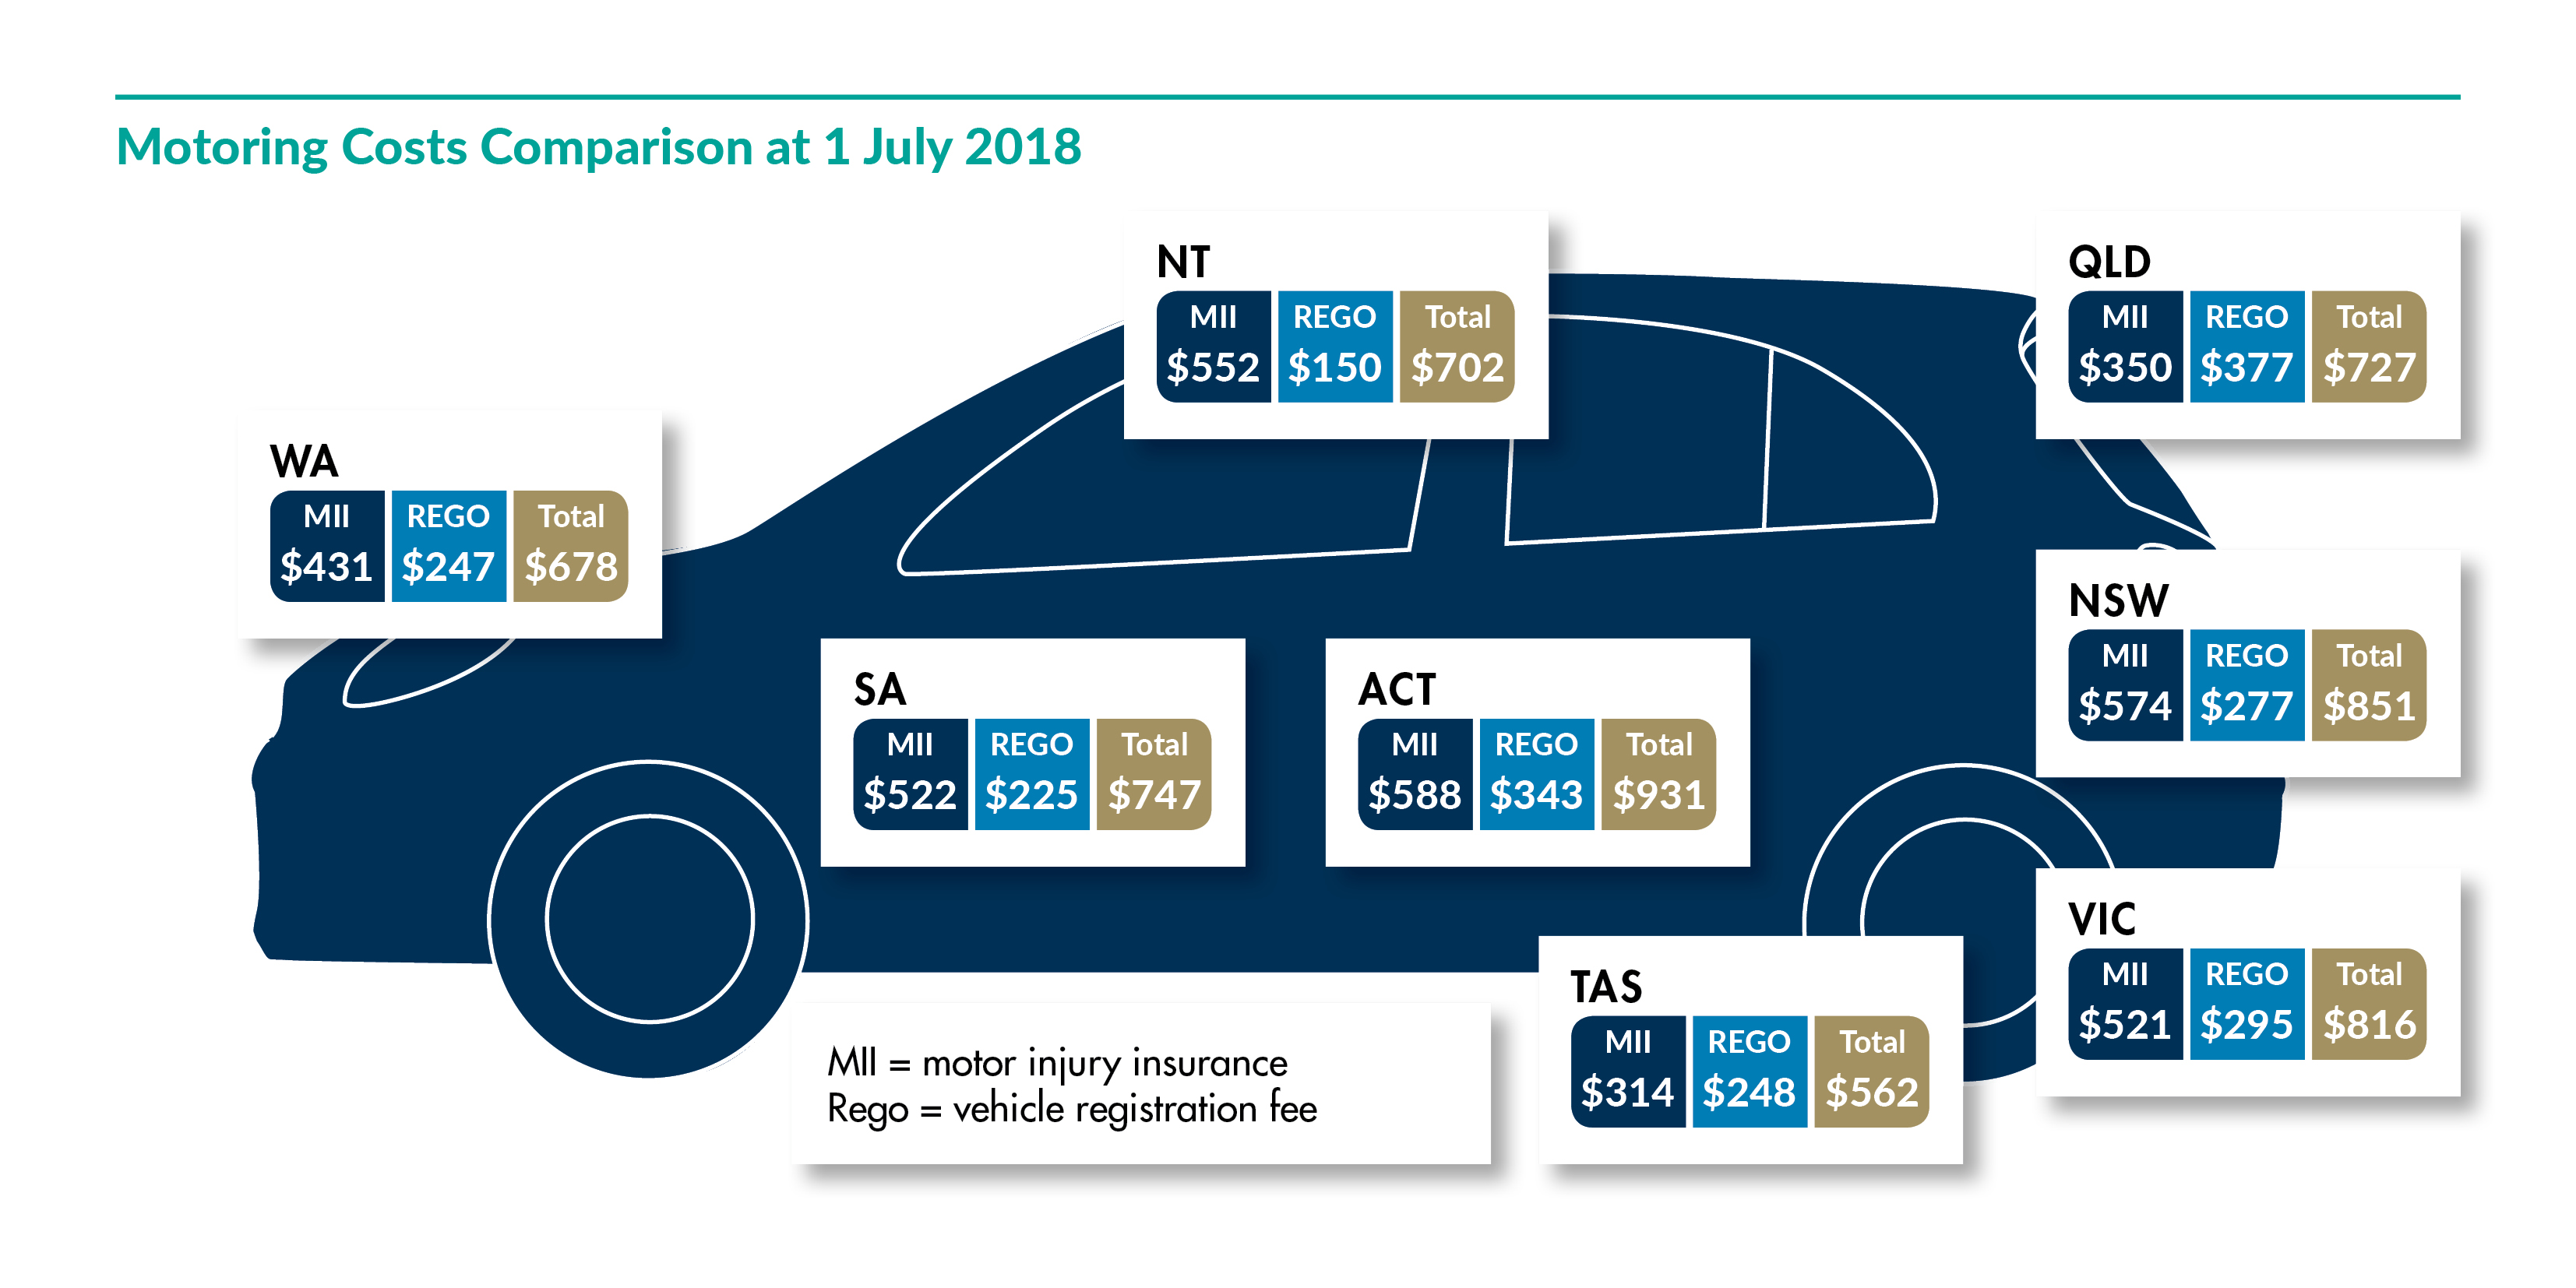 Motor costs comparison at 1 July 2018 for Western Australia $678, Tasmania $562, Northern Territory $702, South Australia $747, Queensland $727, Victoria $816, New South Wales $851 and Australian Capital Territory $931